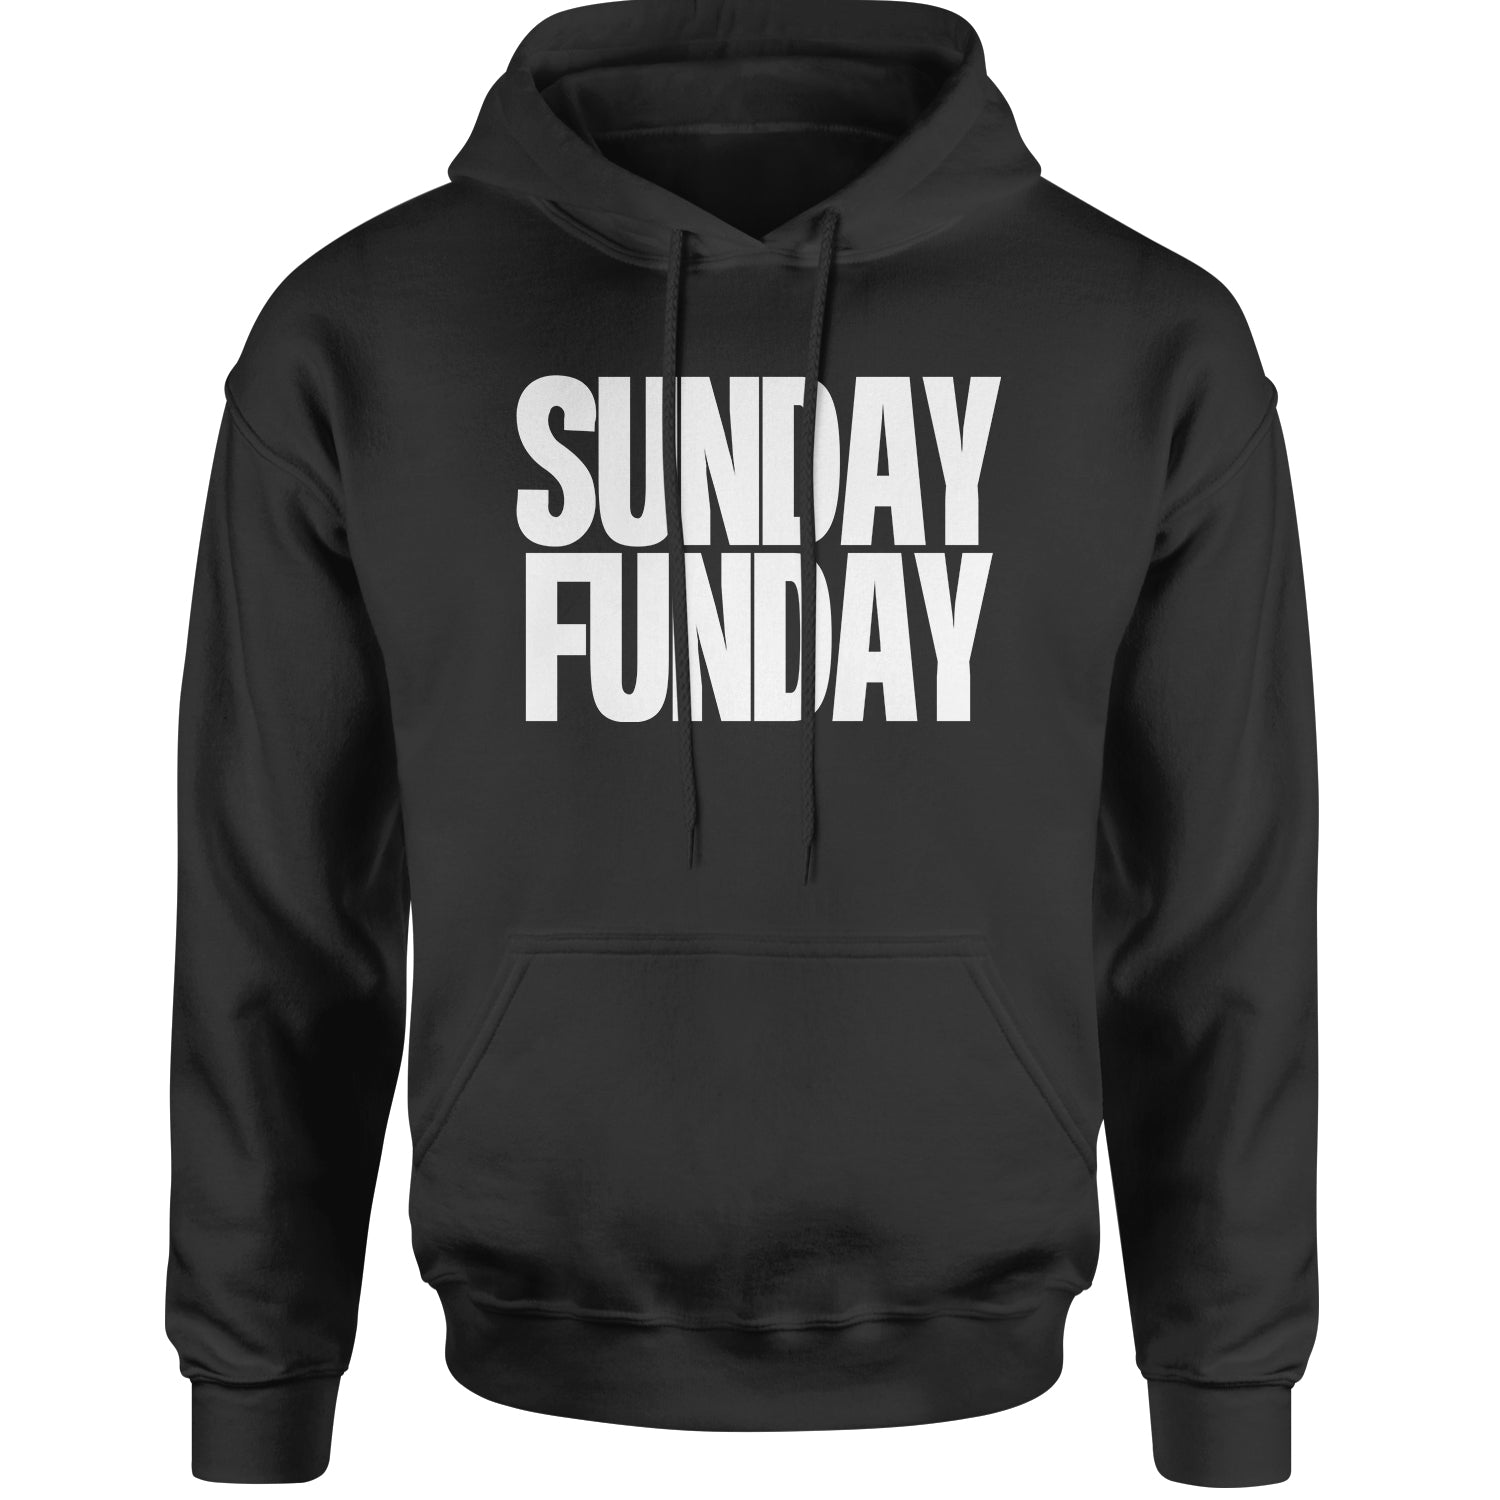 Sunday Funday Adult Hoodie Sweatshirt day, drinking, fun, funday, partying, sun, Sunday by Expression Tees